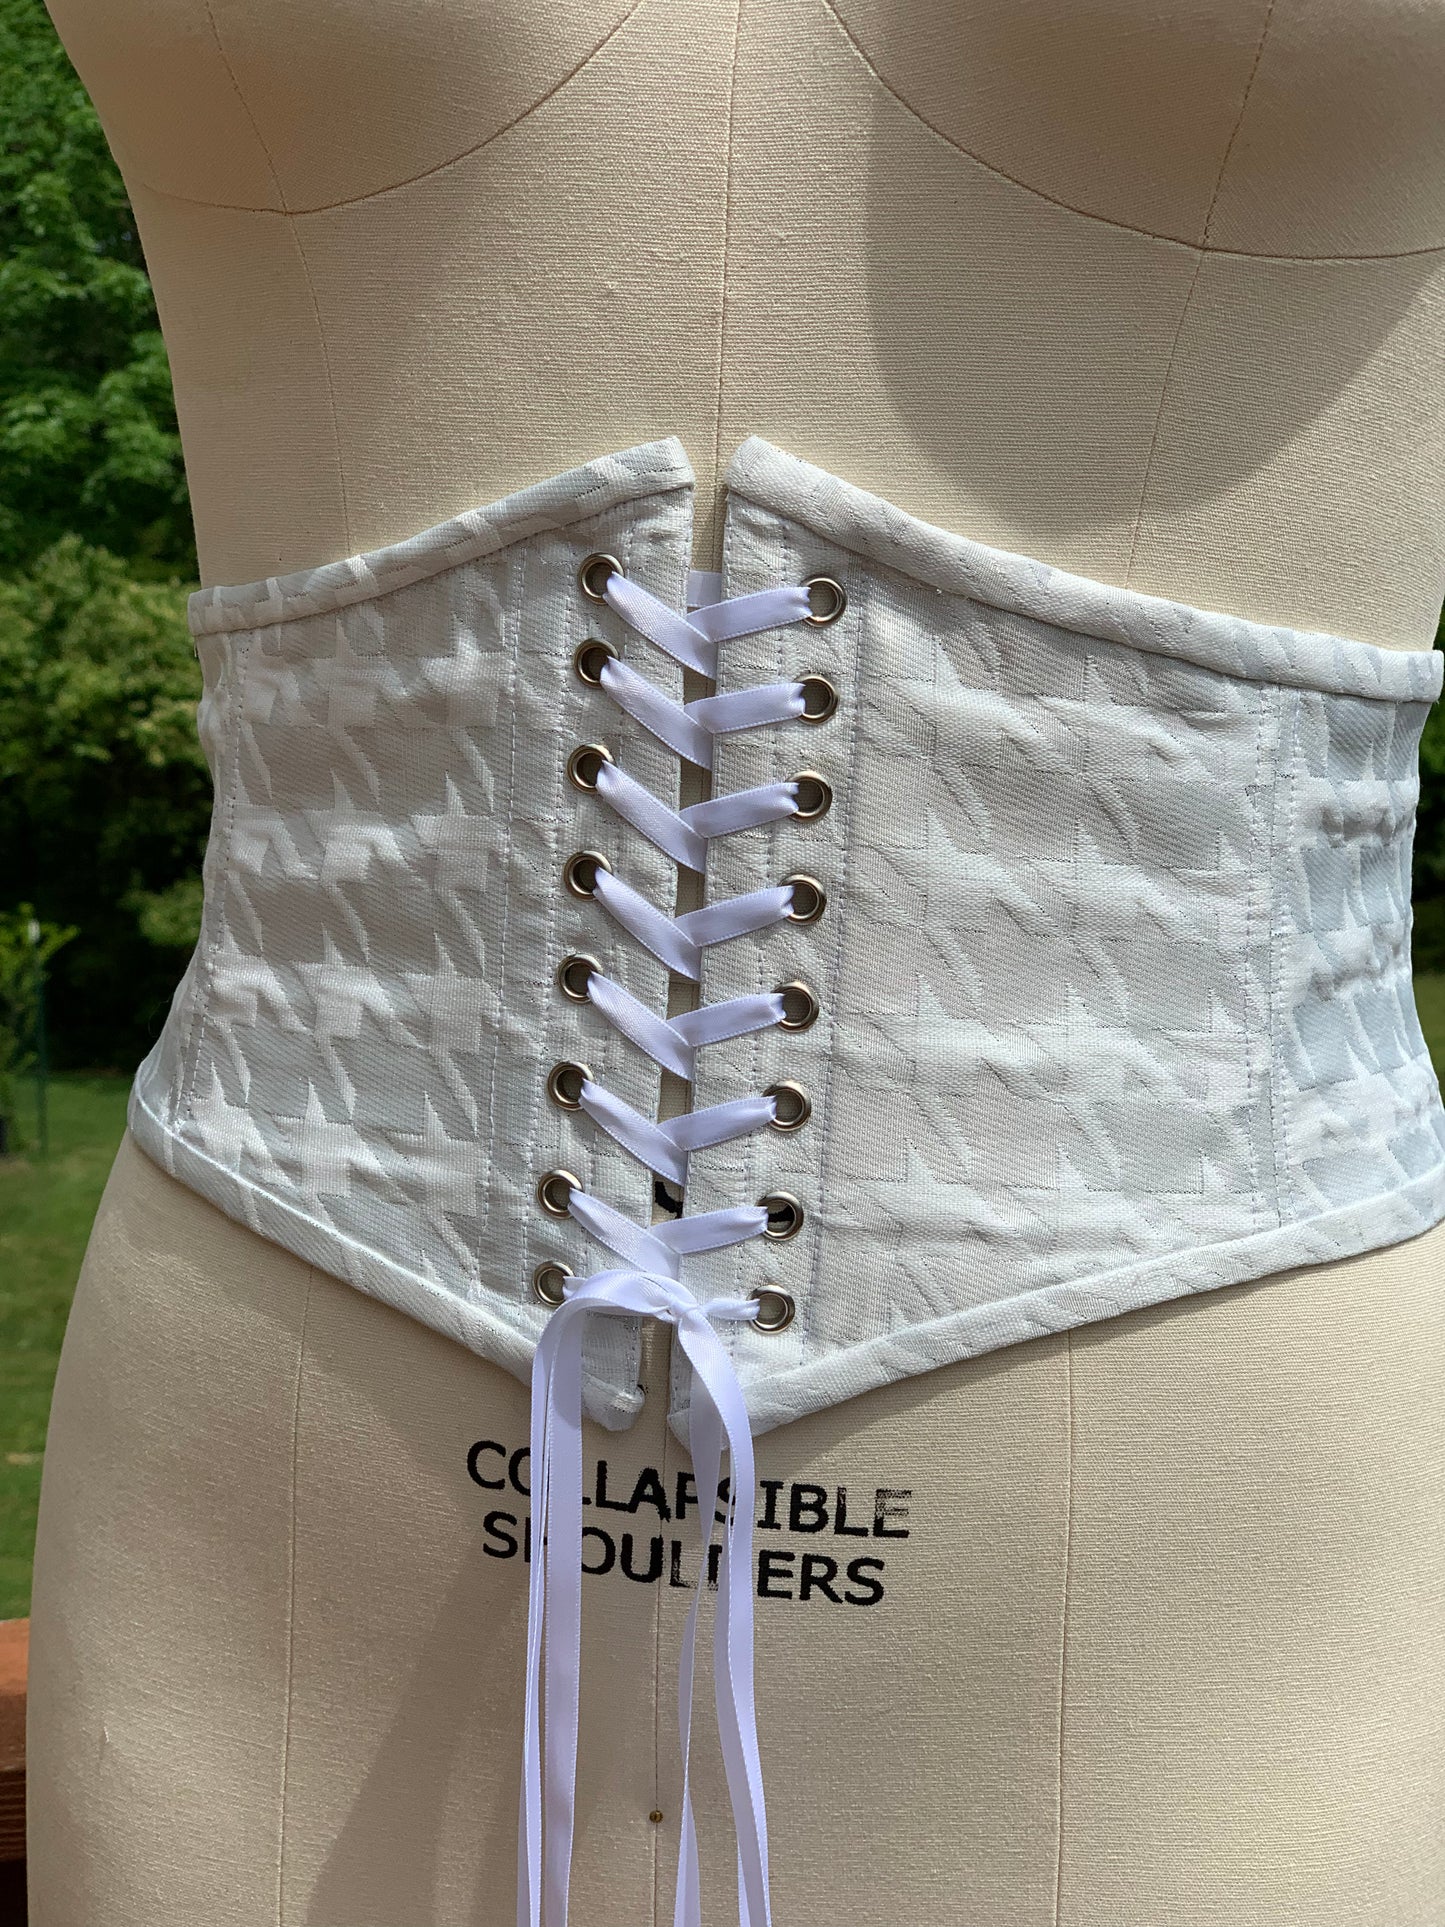 White and Silver Houndstooth Corset Waist Belt